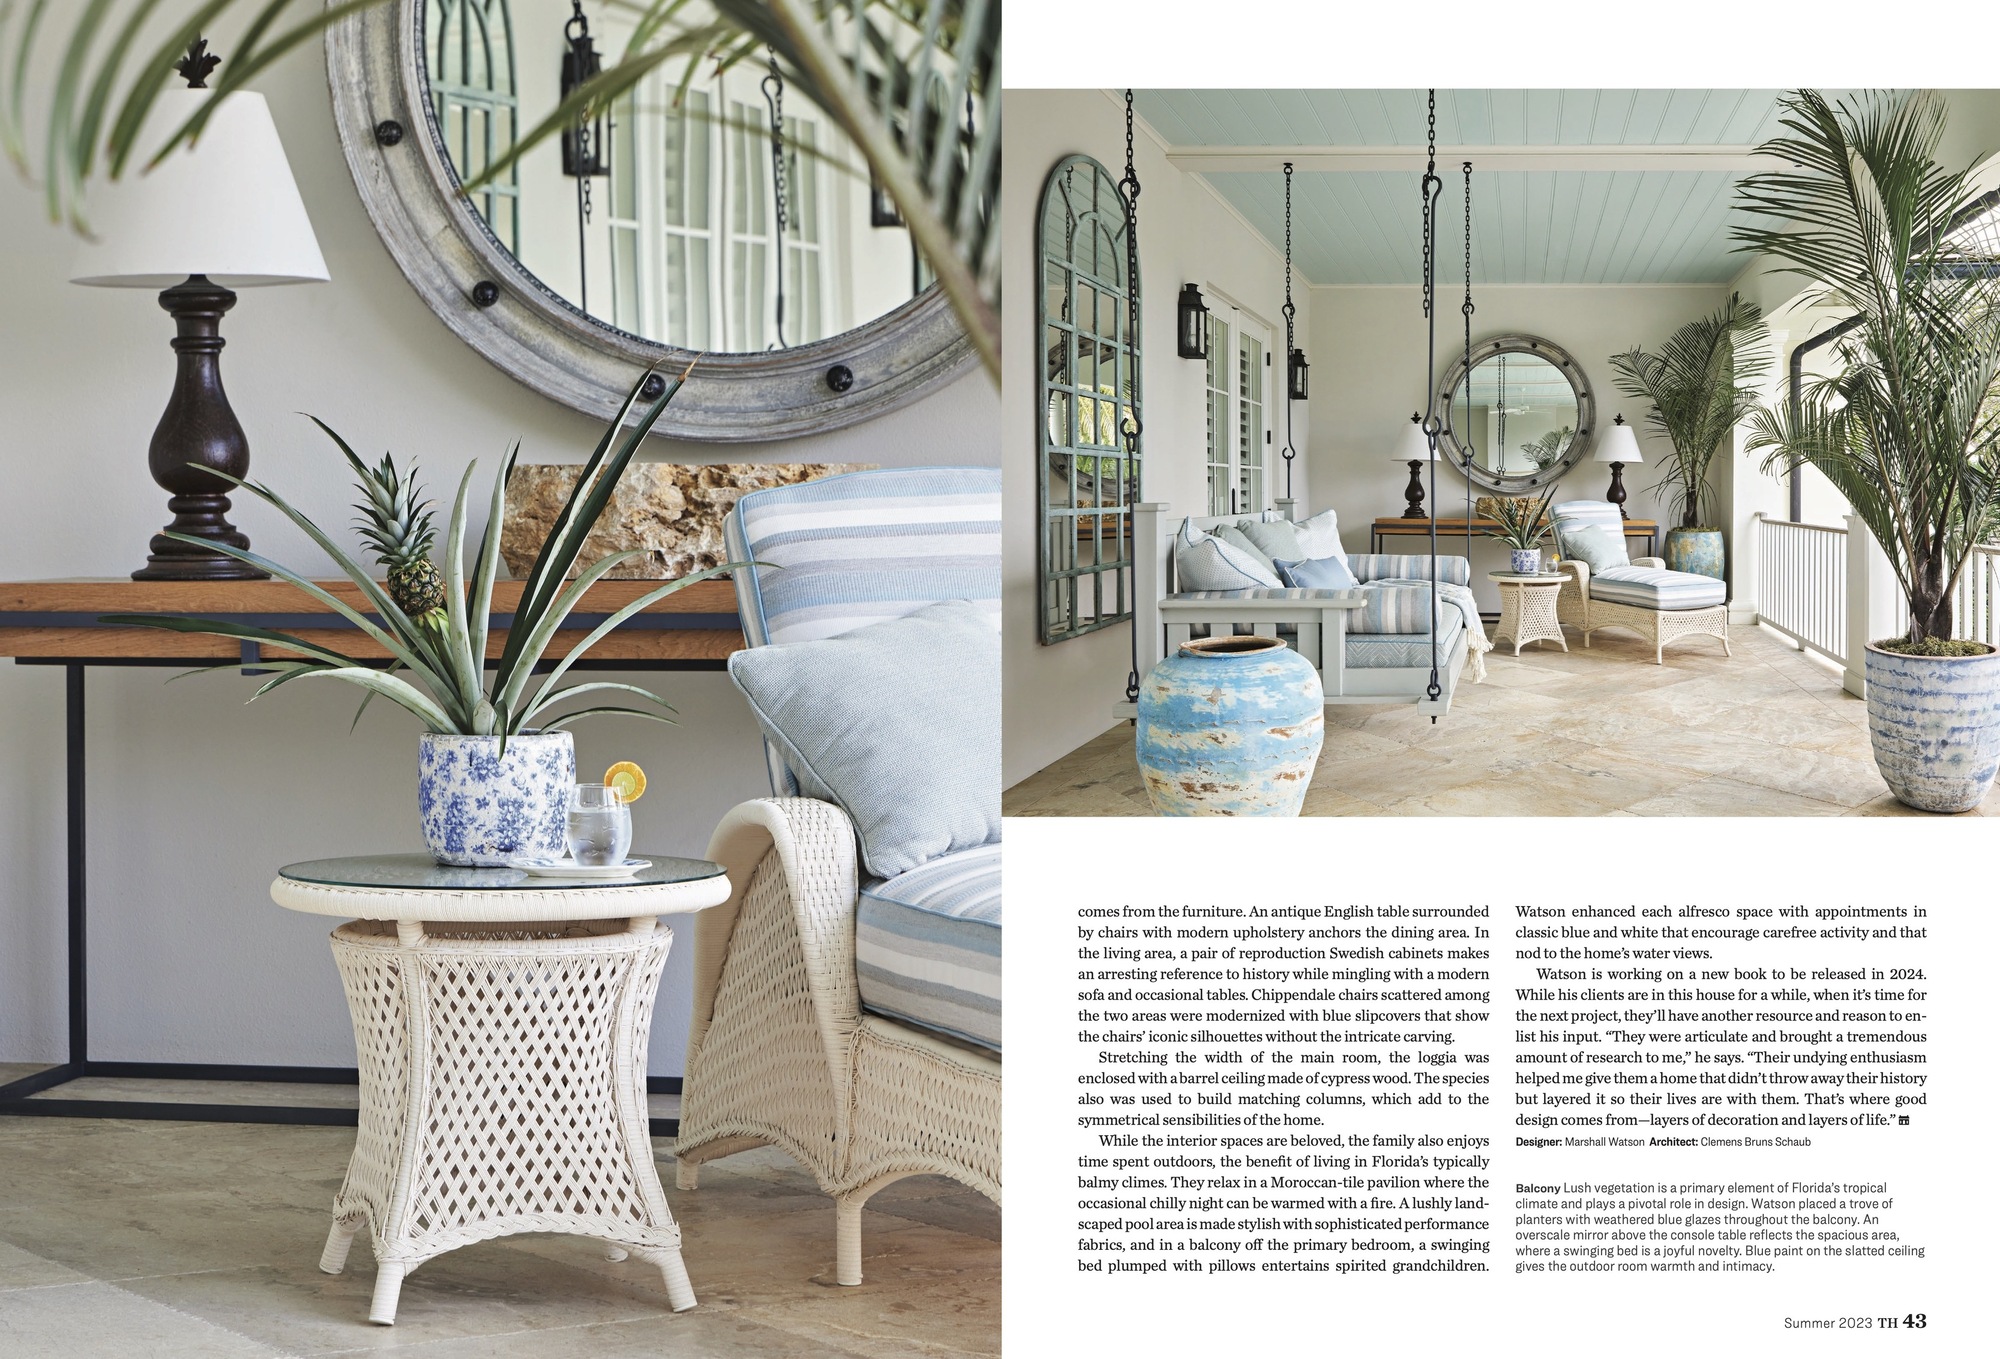 Magazine spread from Traditional Home showing a fancy porch and divan